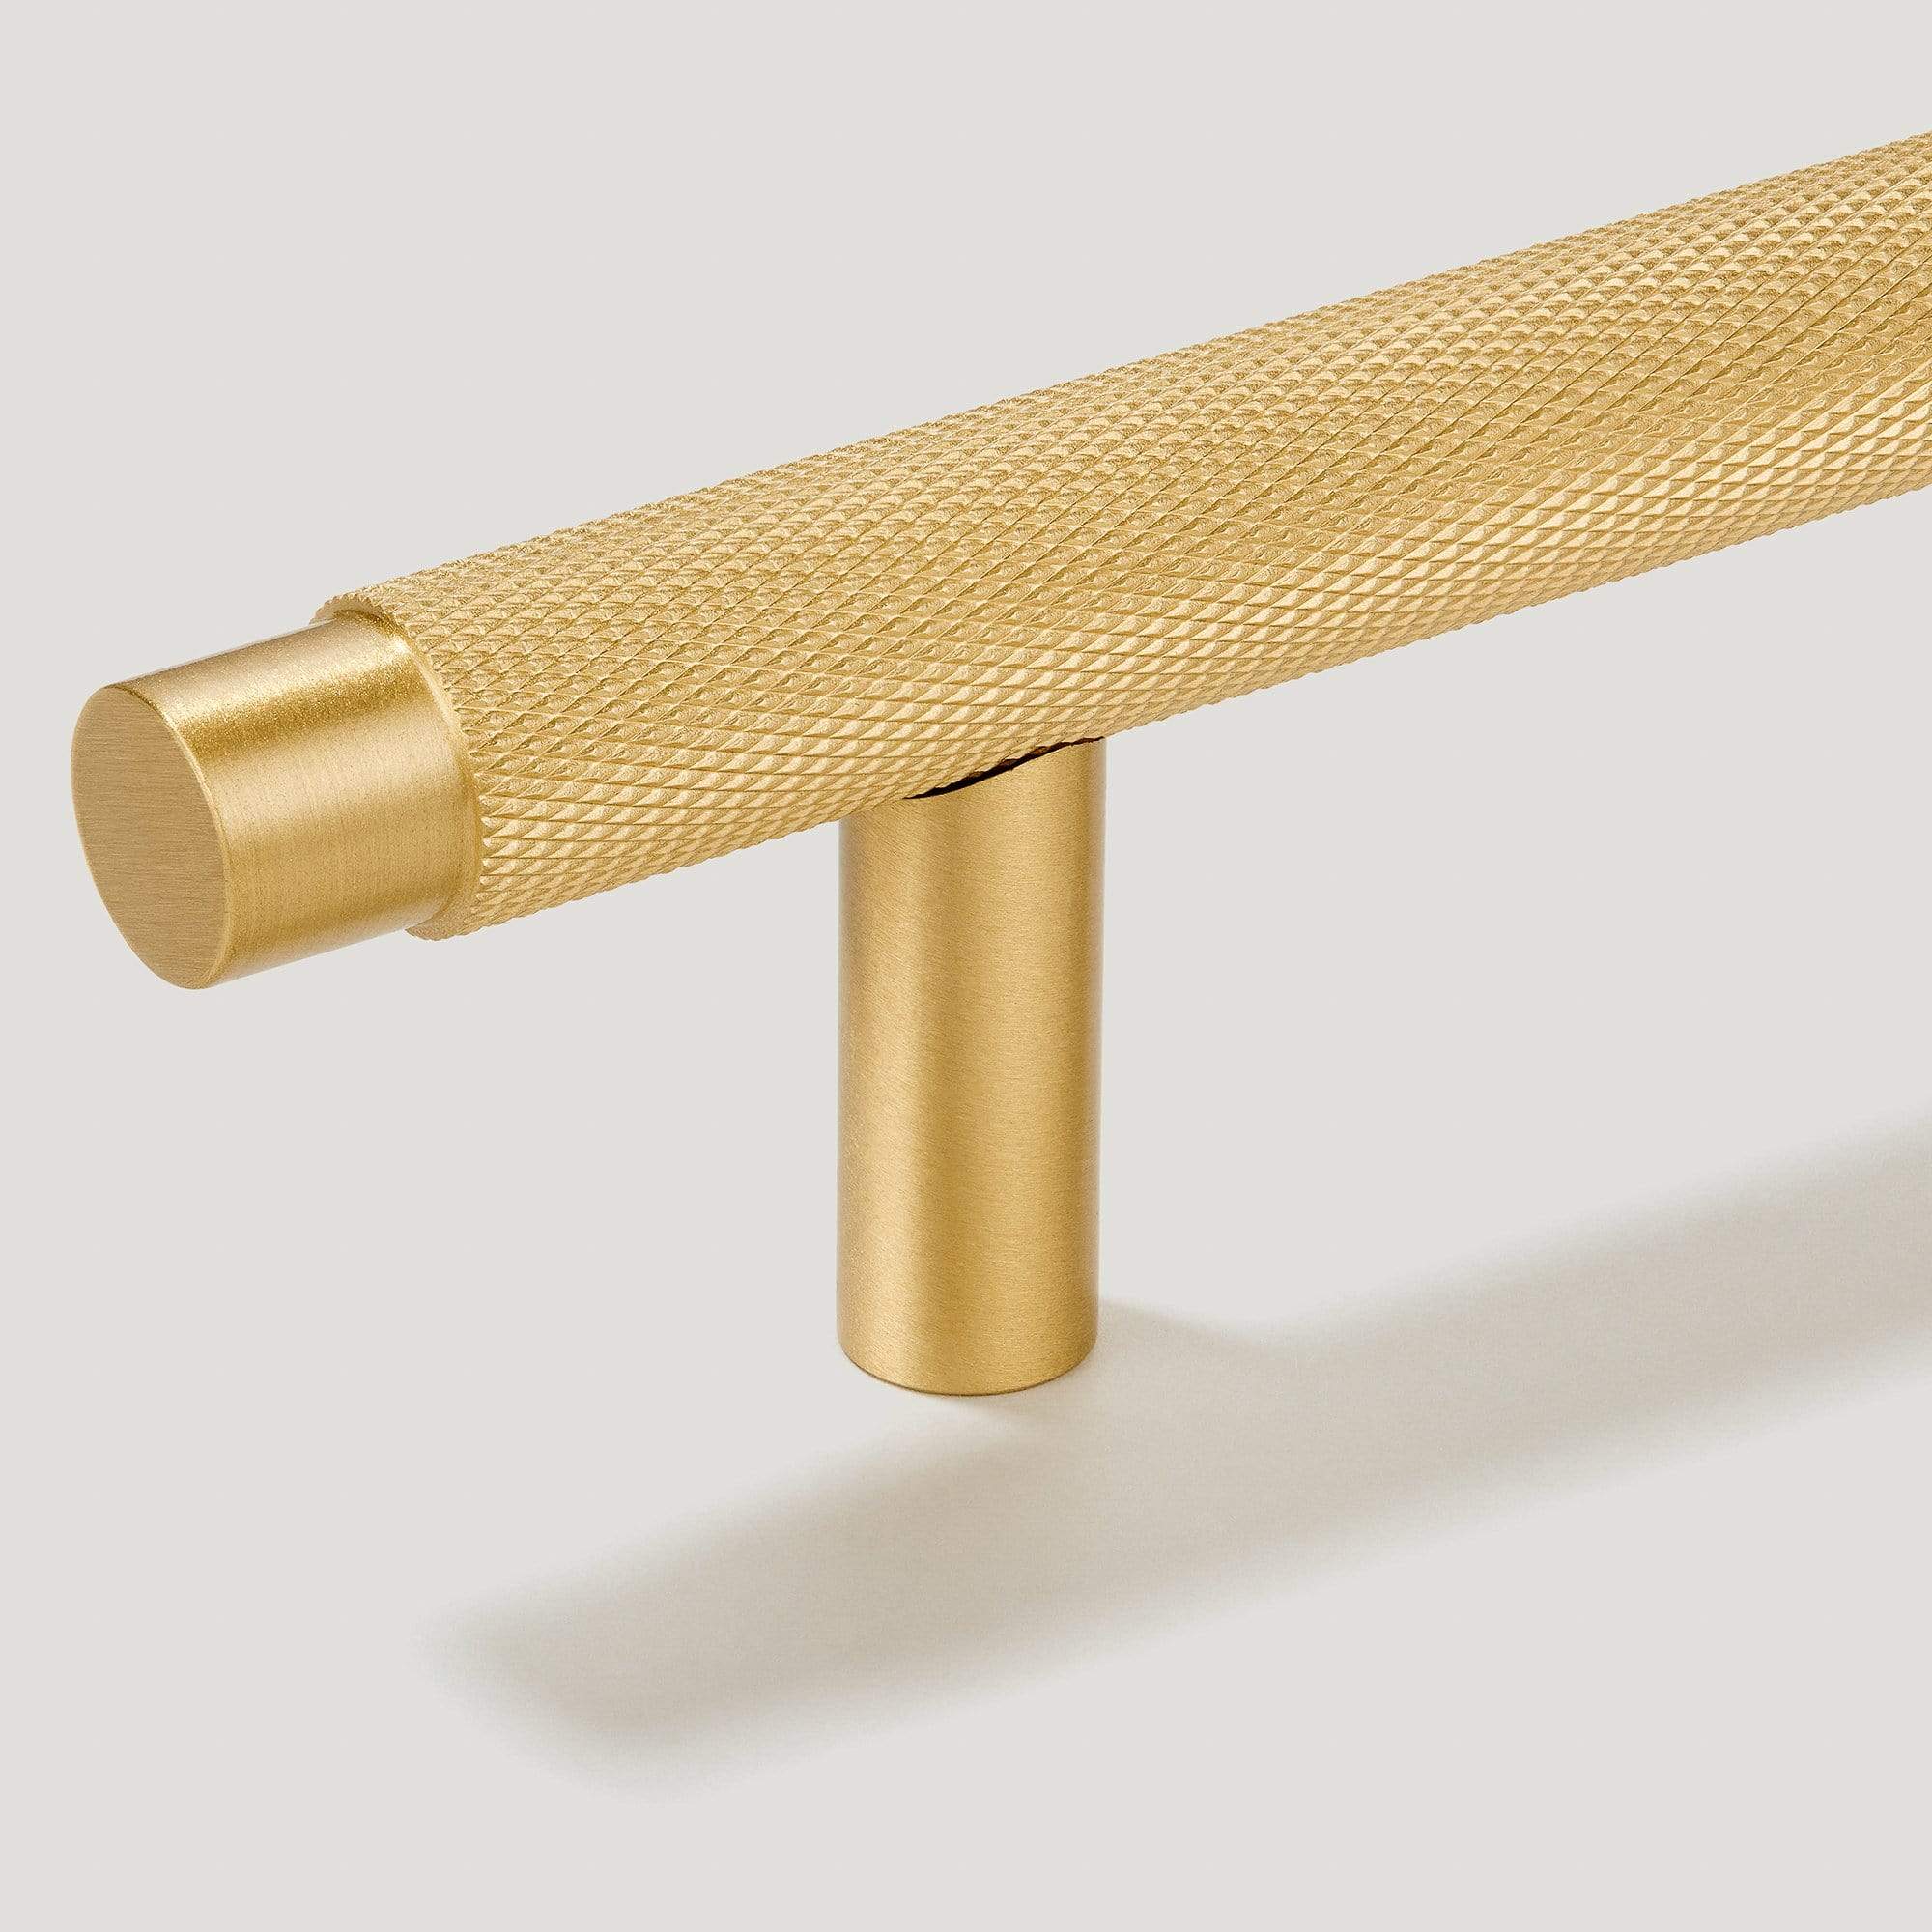 Knurled Brass T Bar Handle  Knurled T Bar Pull Handle – Plank Hardware